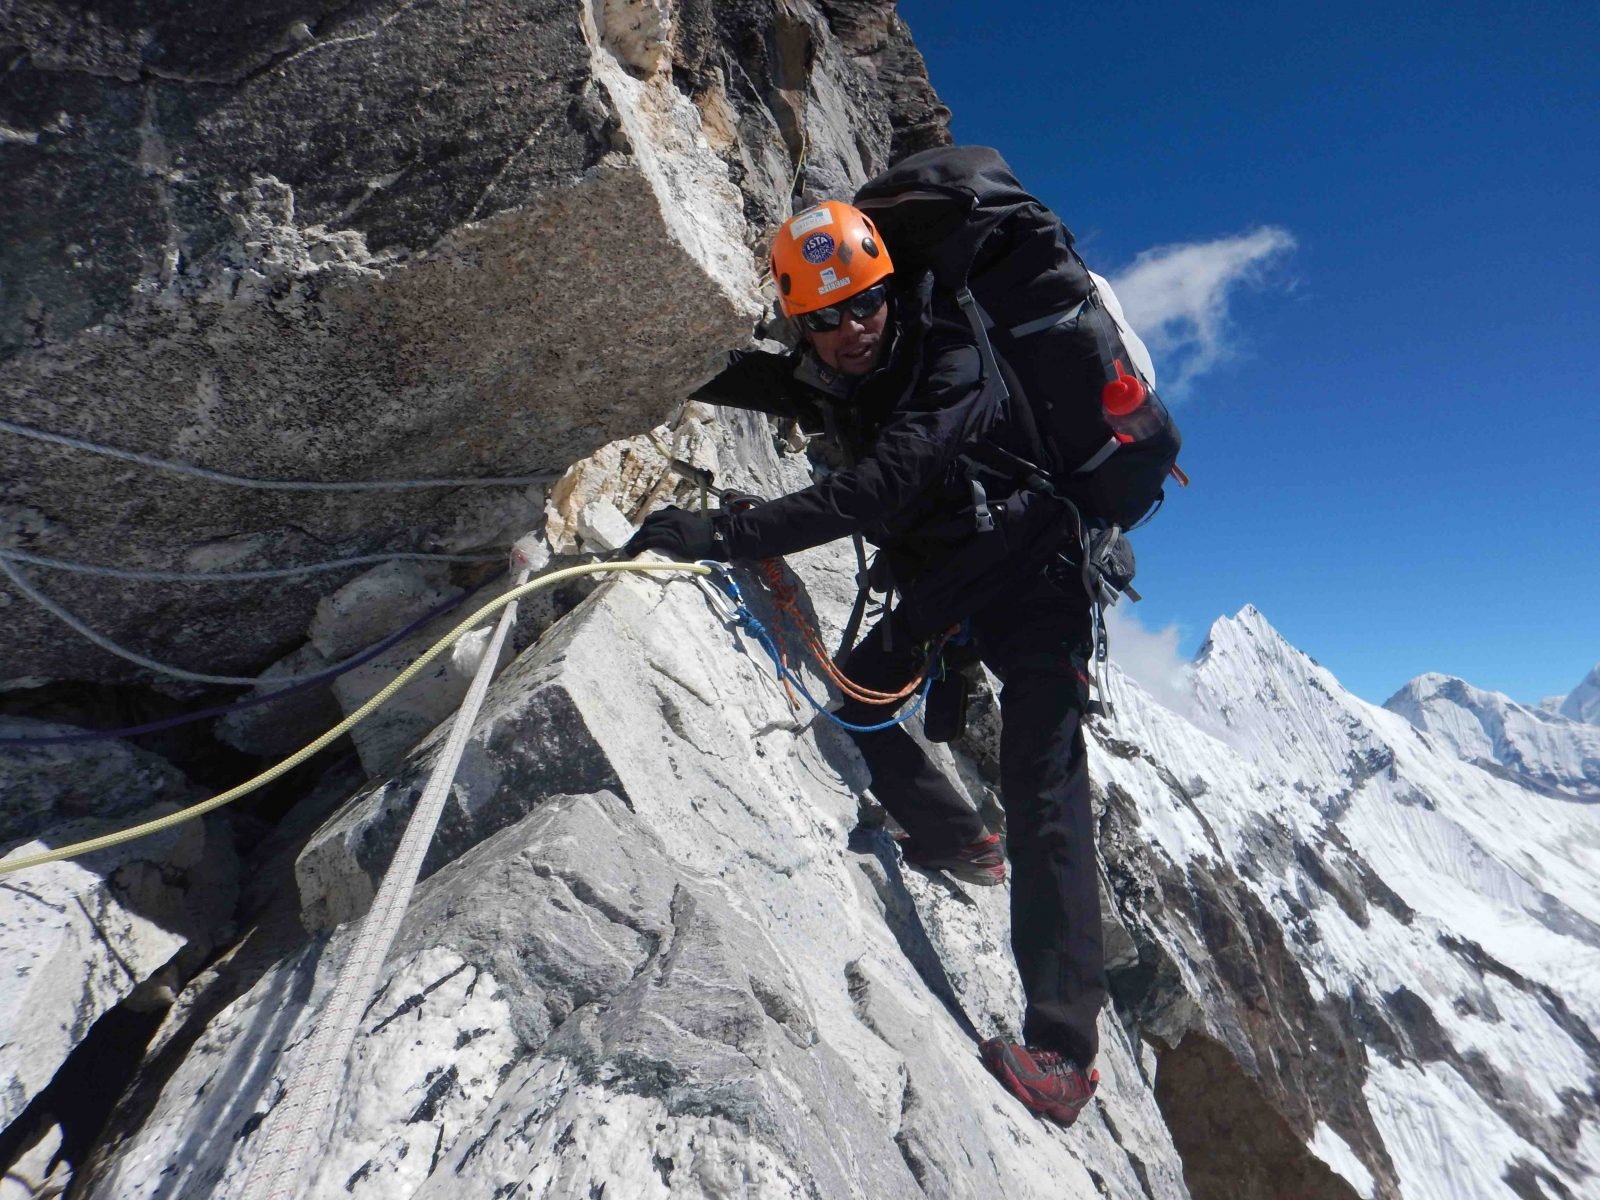 A mountaineer climbing on Mardi Peak, attached to ropes.